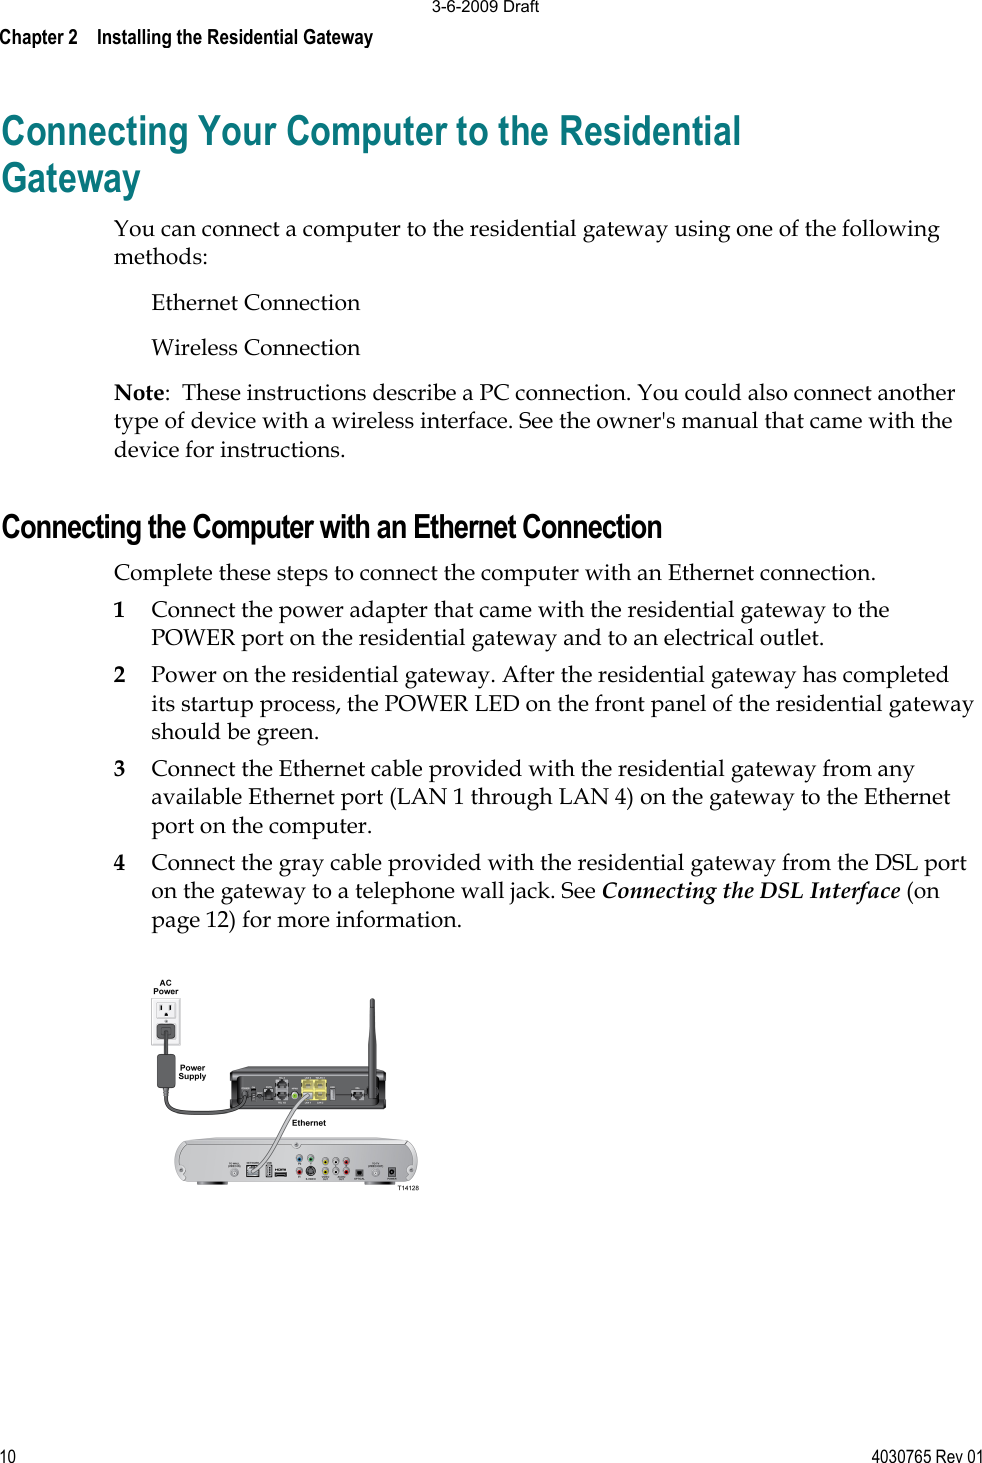 Chapter 2    Installing the Residential Gateway10 4030765 Rev 01Connecting Your Computer to the Residential Gateway You can connect a computer to the residential gateway using one of the following methods: Ethernet Connection Wireless Connection Note:  These instructions describe a PC connection. You could also connect another type of device with a wireless interface. See the owner&apos;s manual that came with the device for instructions. Connecting the Computer with an Ethernet Connection Complete these steps to connect the computer with an Ethernet connection. 1Connect the power adapter that came with the residential gateway to the POWER port on the residential gateway and to an electrical outlet.  2Power on the residential gateway. After the residential gateway has completed its startup process, the POWER LED on the front panel of the residential gateway should be green. 3Connect the Ethernet cable provided with the residential gateway from any available Ethernet port (LAN 1 through LAN 4) on the gateway to the Ethernet port on the computer. 4Connect the gray cable provided with the residential gateway from the DSL port on the gateway to a telephone wall jack. See Connecting the DSL Interface (on page 12) for more information. 3-6-2009 Draft